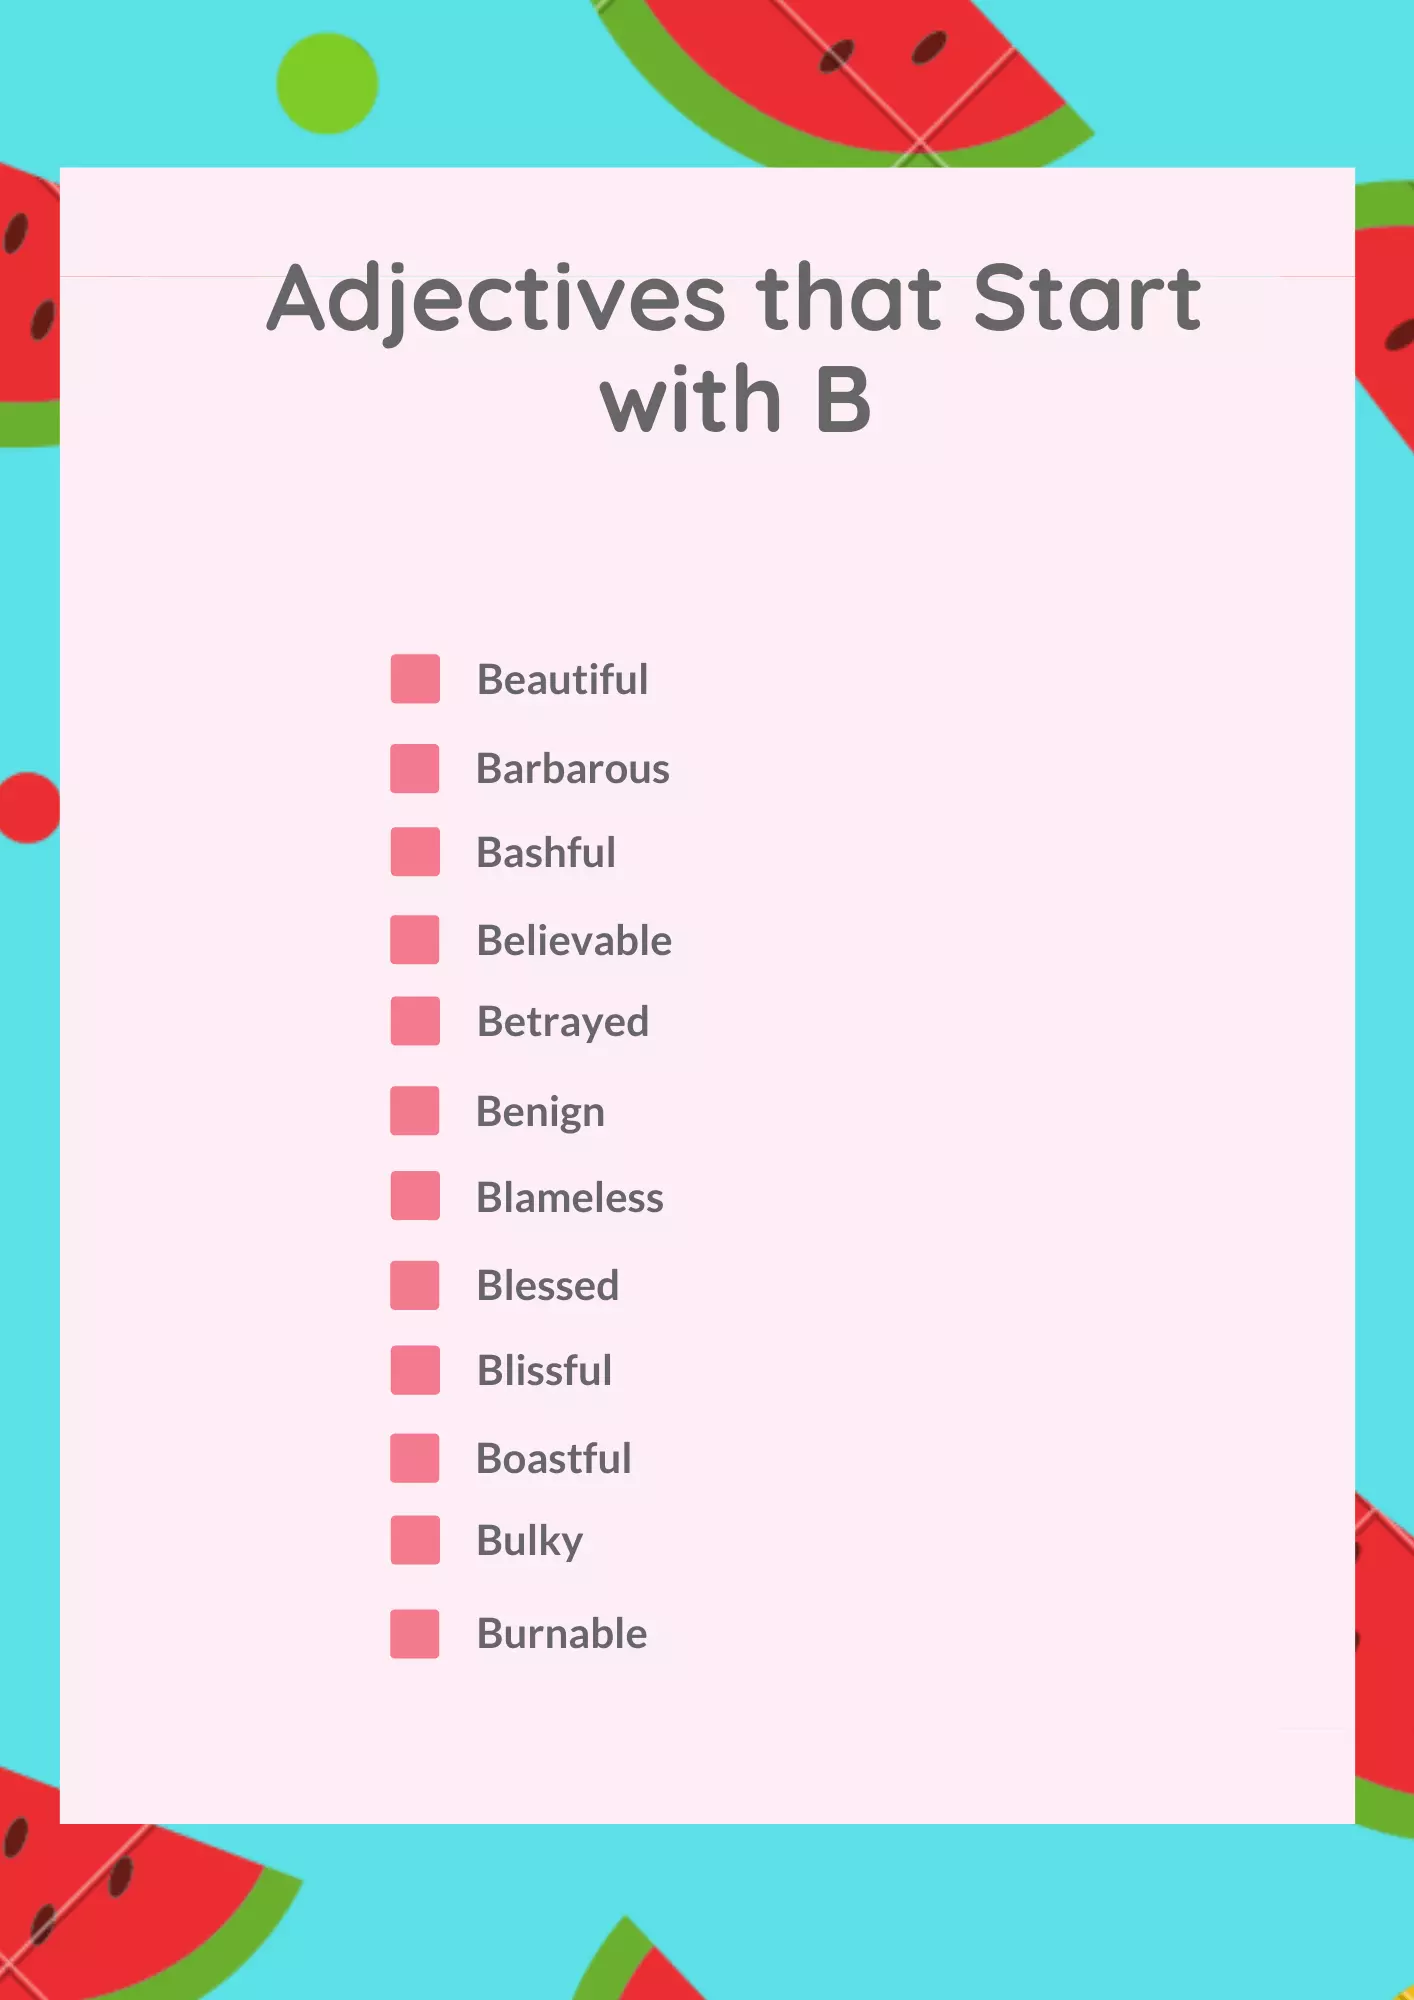 adjectives that start with B